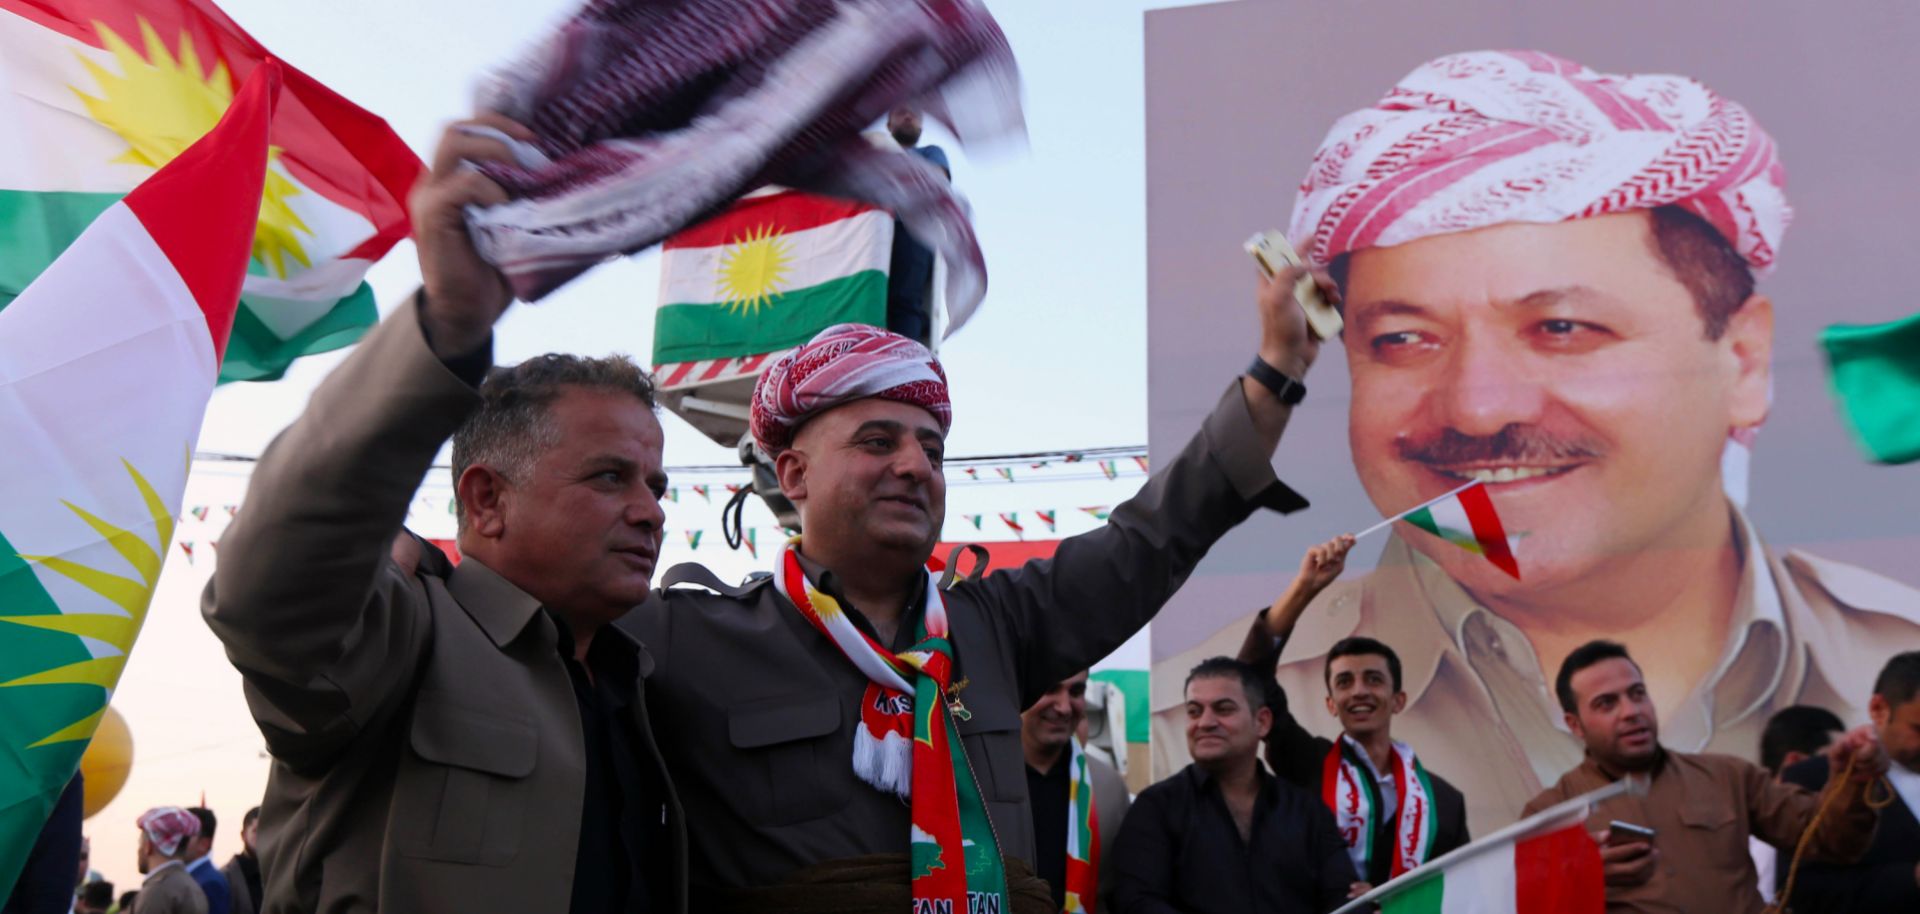 Iraqi Kurds gather in the streets of Arbil to urge people to vote in the upcoming independence referendum.